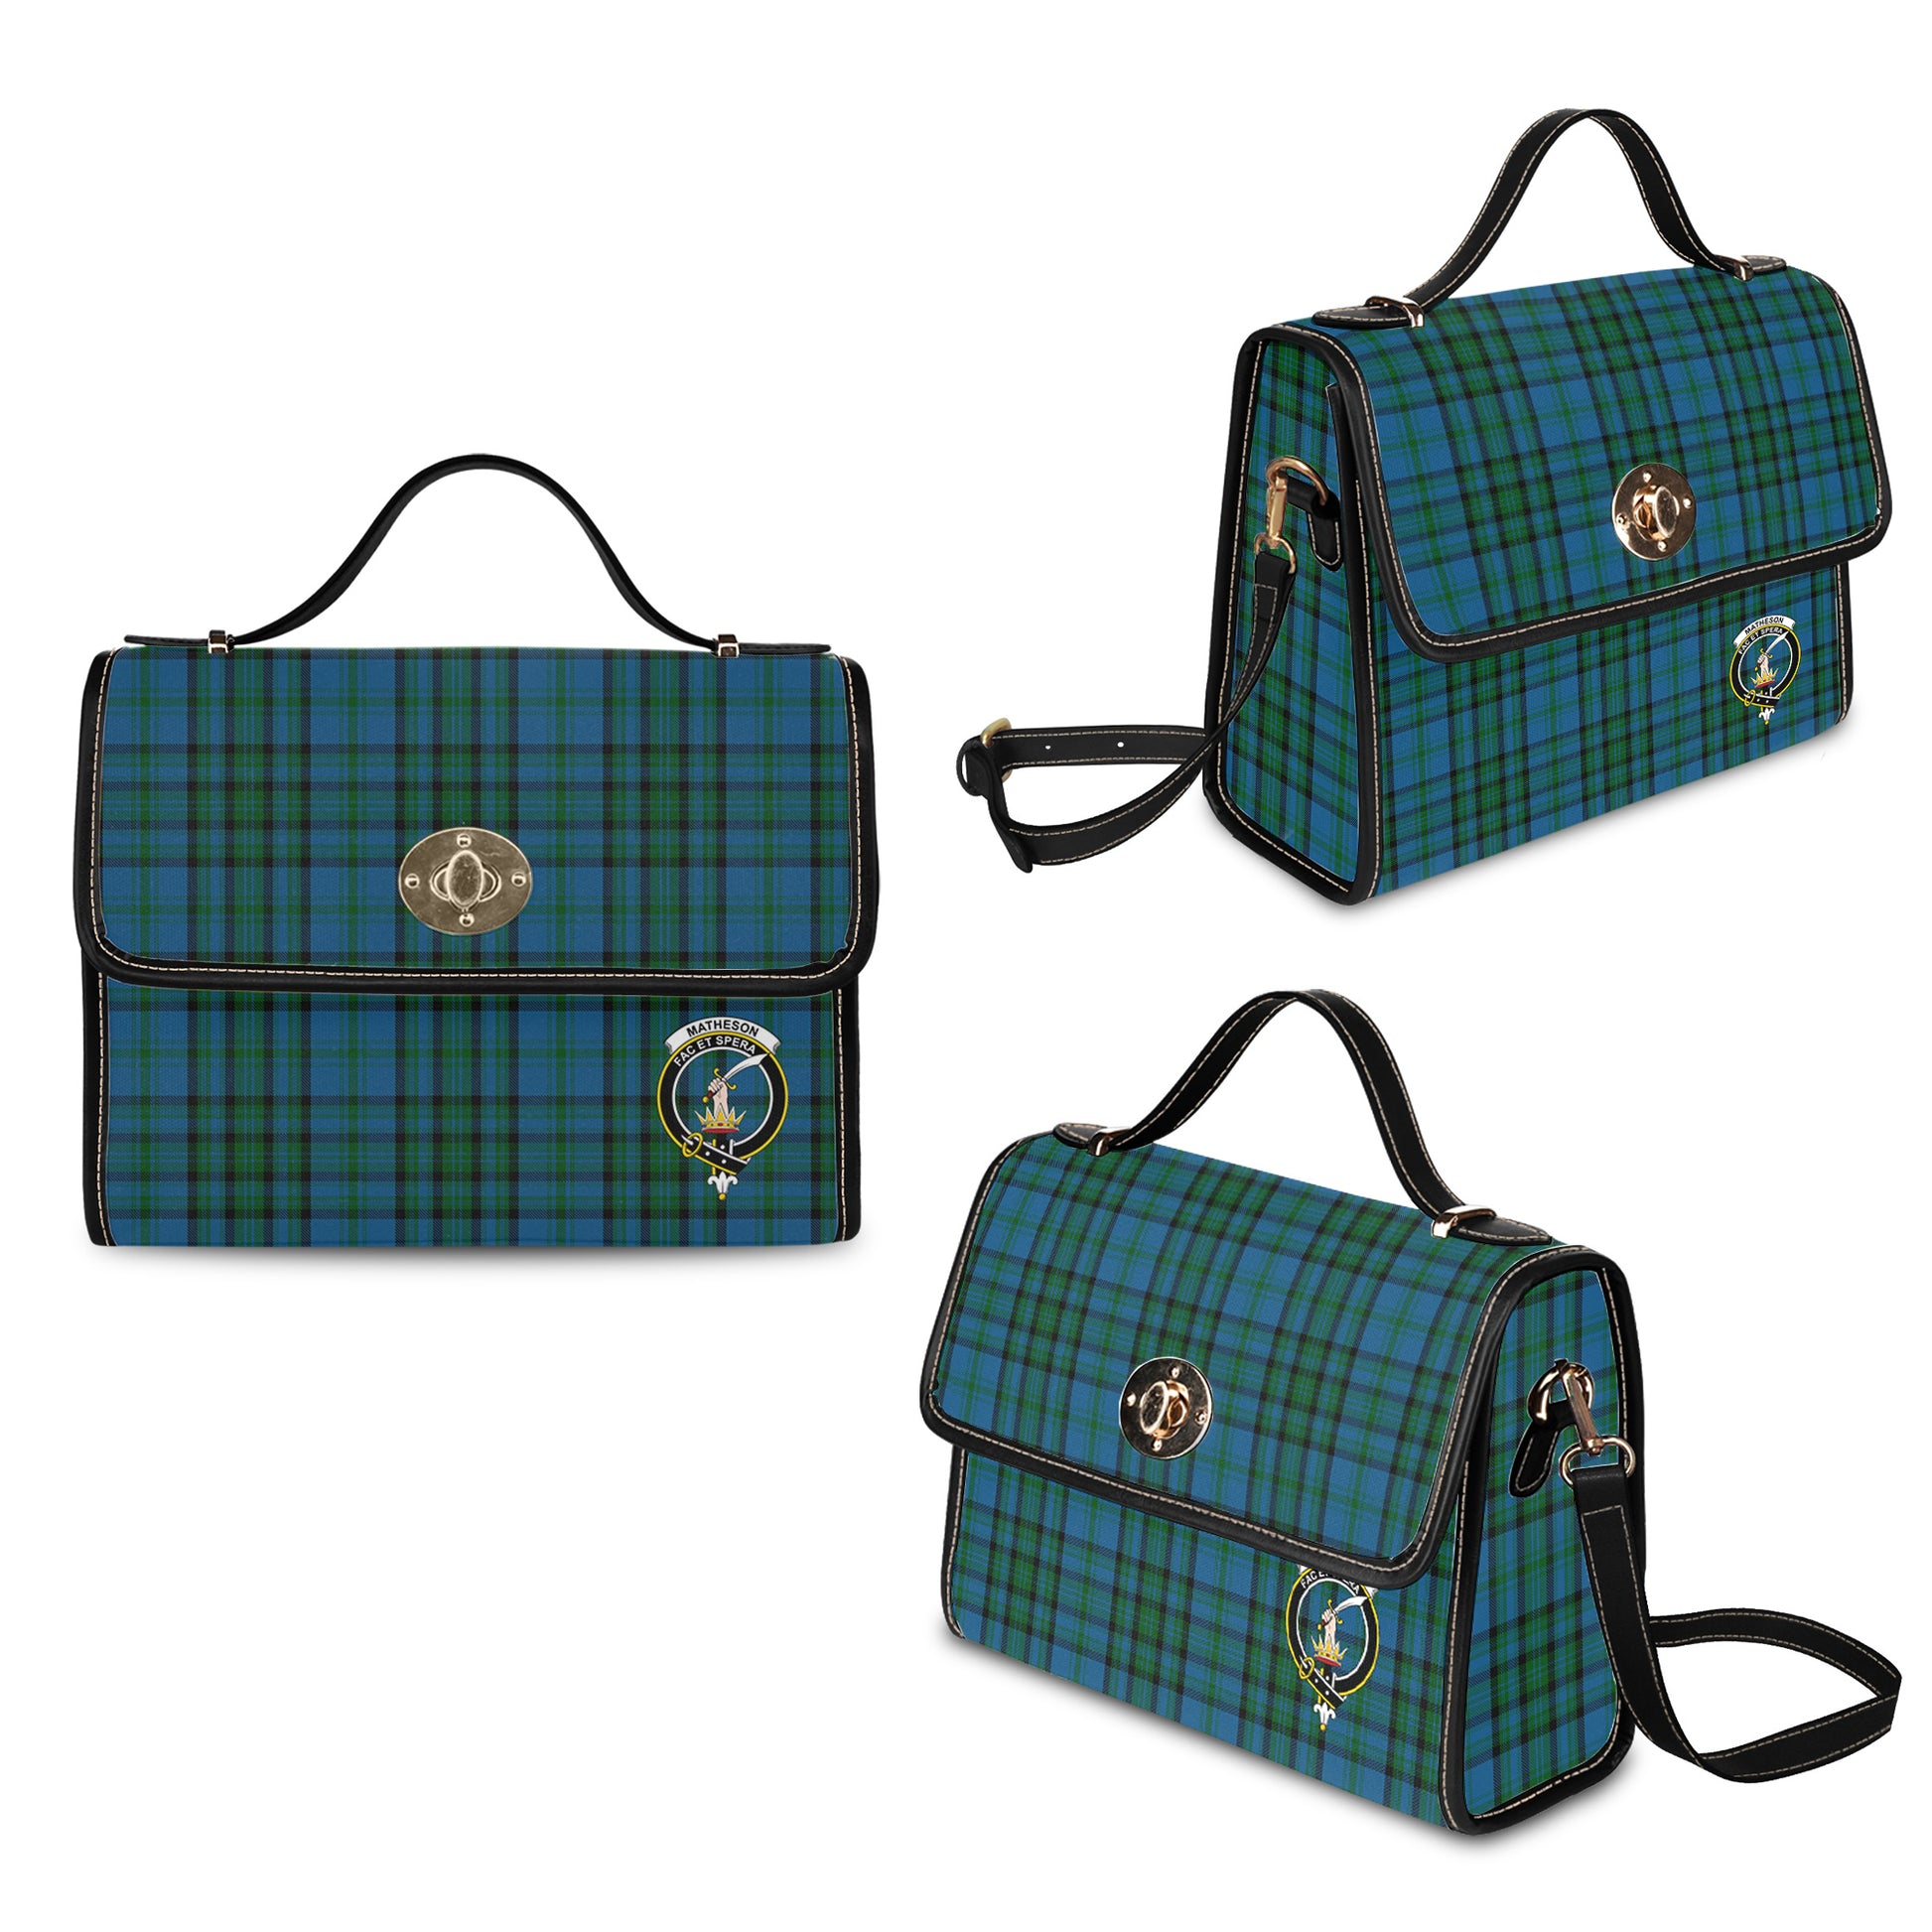 matheson-hunting-tartan-leather-strap-waterproof-canvas-bag-with-family-crest